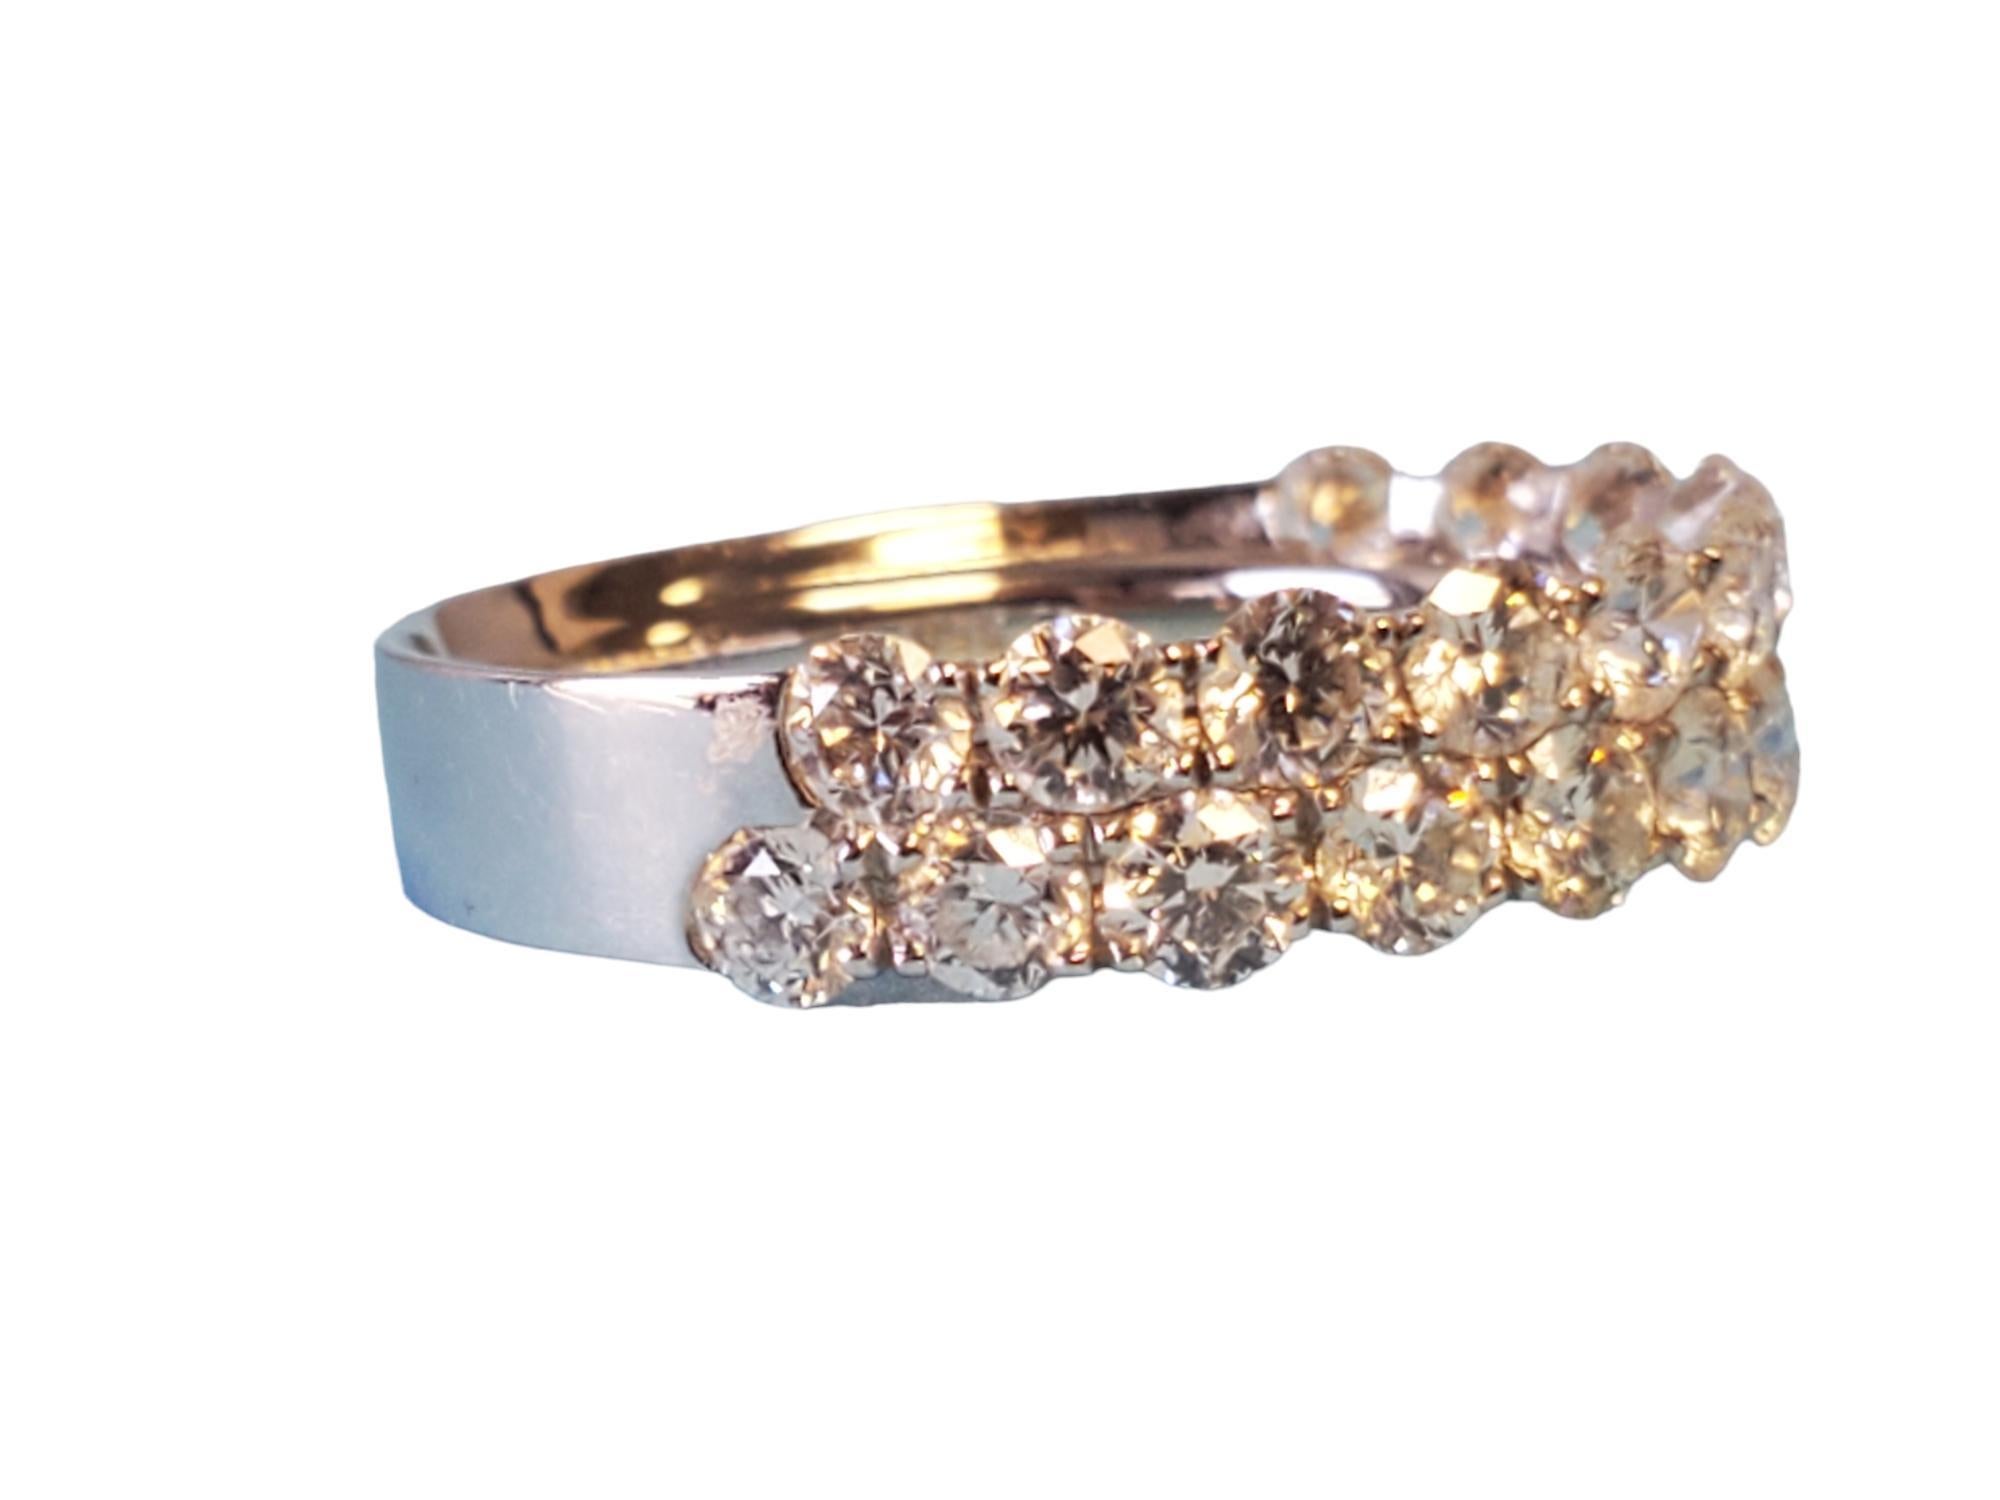 18k White gold half eternity band - closeout piece. Unworn, gorgeous 2 row diamond band that goes halfway around the ring. This band features 2.00tcw white vs diamonds that exhibit fire and scintillation. The size is 6.75, ready to wear.